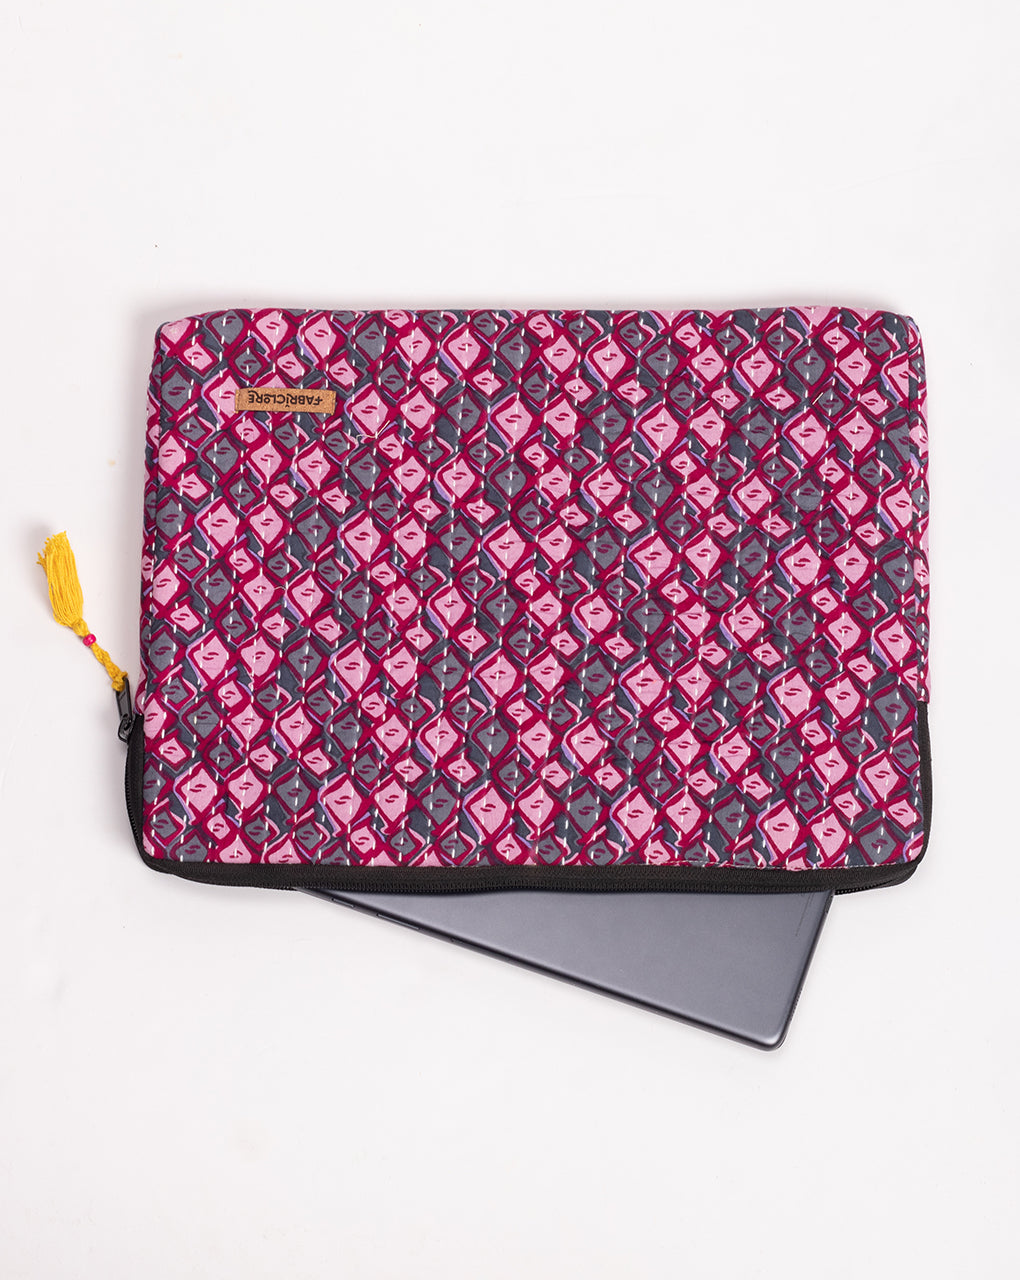 Geometric Kantha Quilted Laptop Sleeve - Fabriclore.com